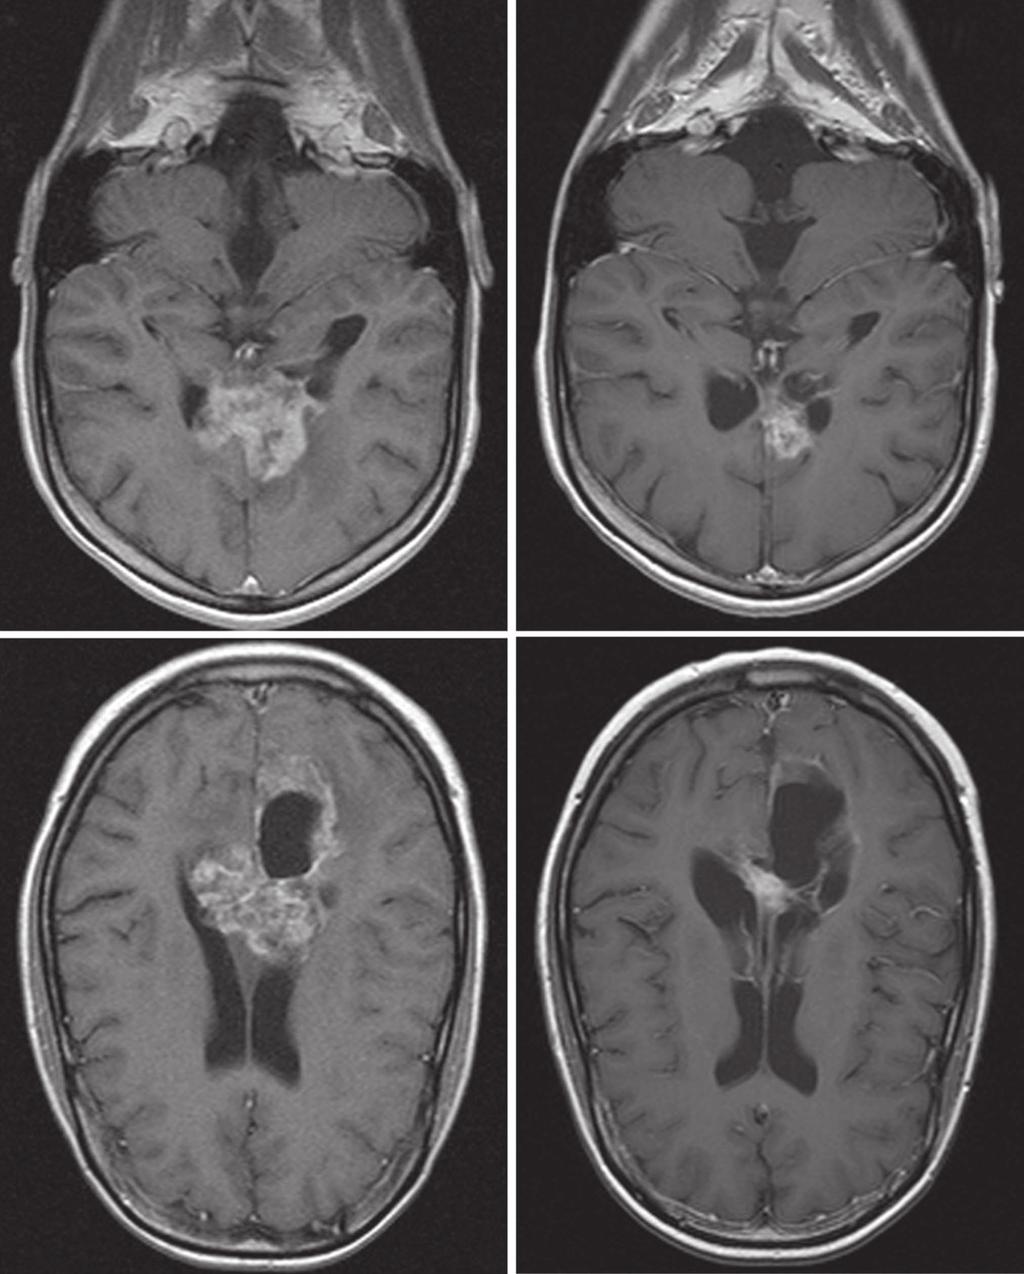 Bevacizumab and Irinotecan for Glioblastoma Multiforme A B C D Fig 3. Baseline and post-treatment magnetic resonance imaging of patients treated with bevacizumab and irinotecan.